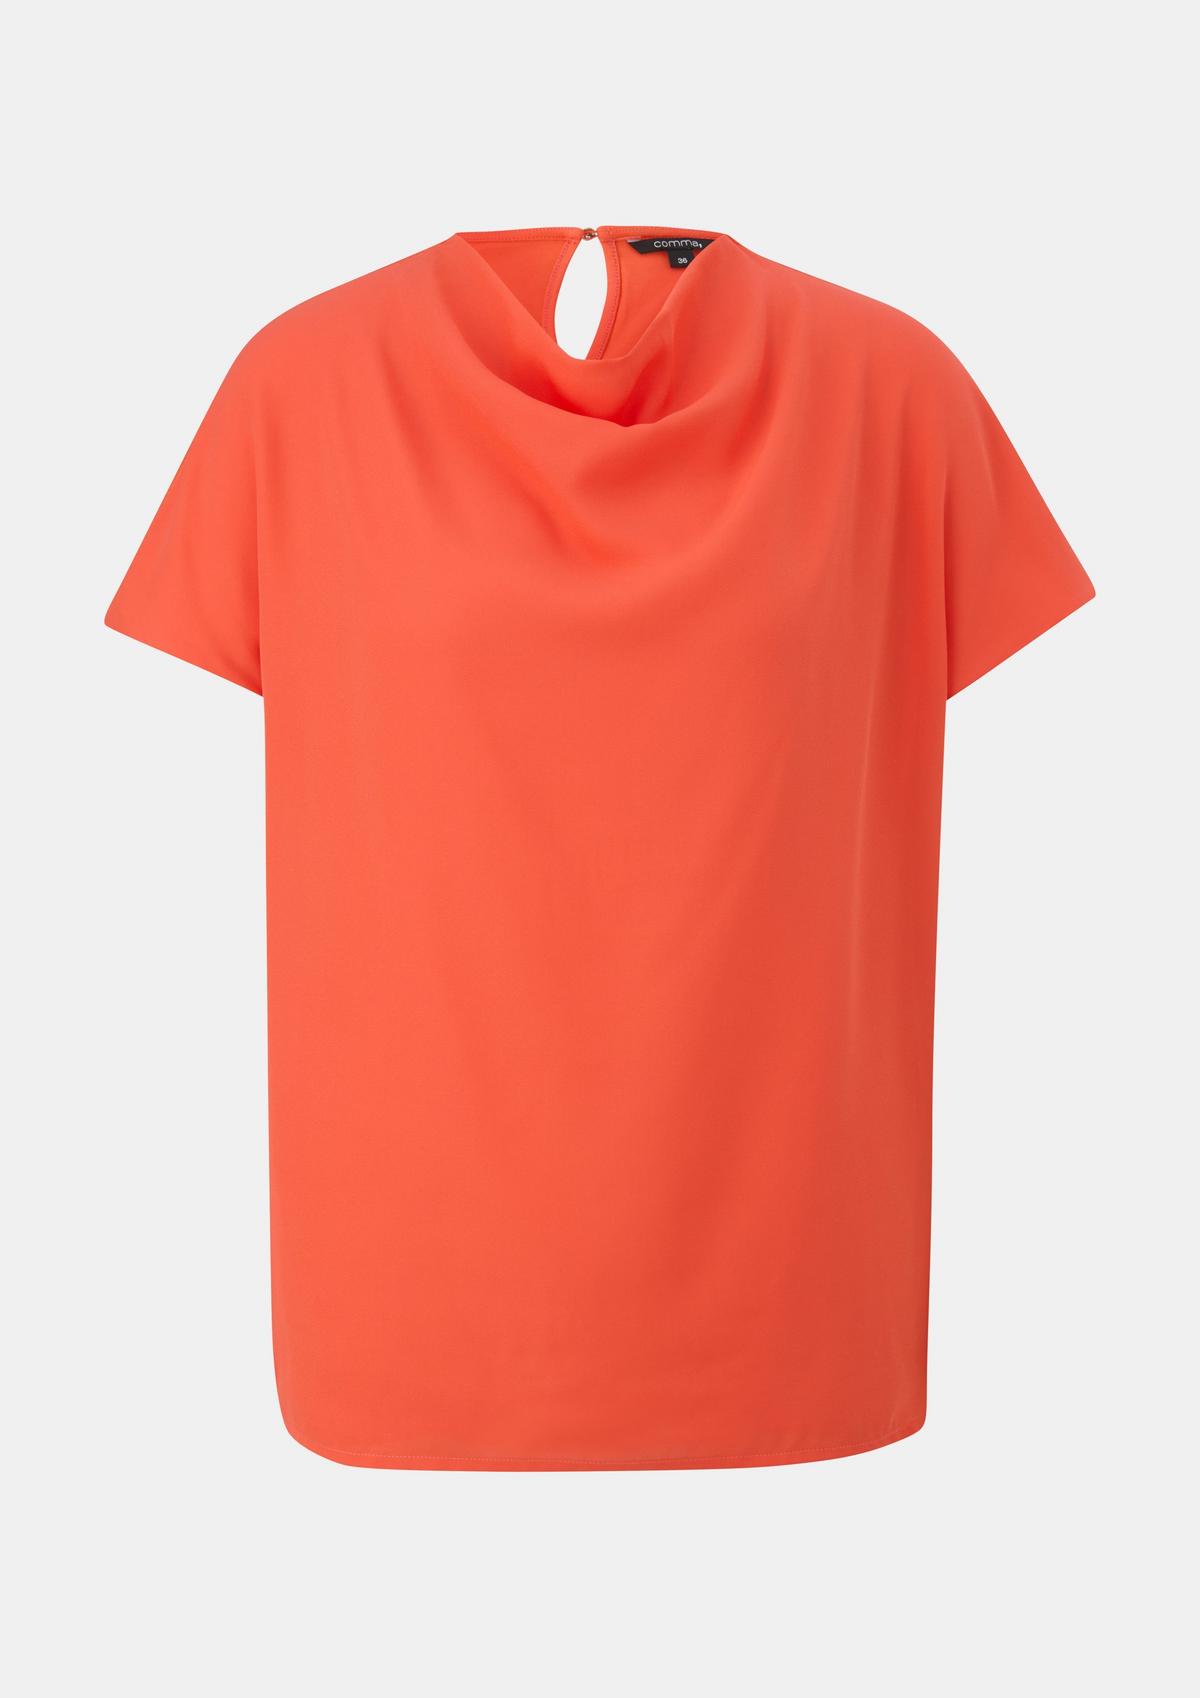 Shirts & Tops for Women | Comma